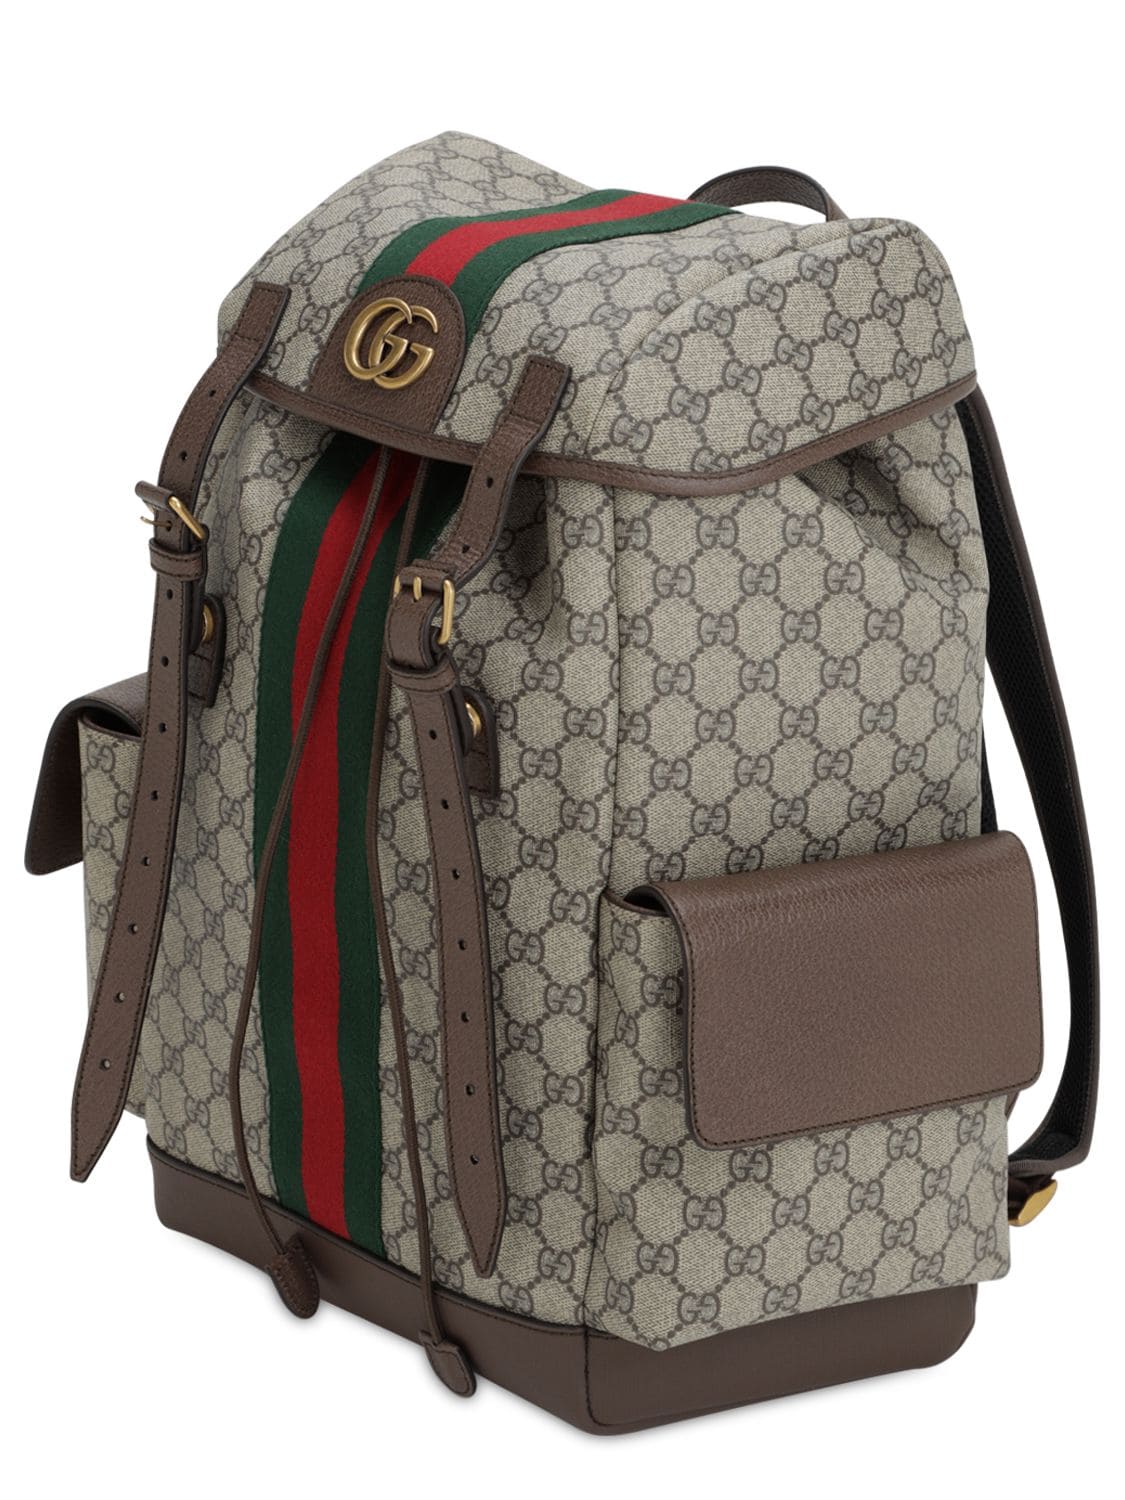 Gucci Ophidia Medium Gg Supreme Canvas Backpack In Beige | ModeSens